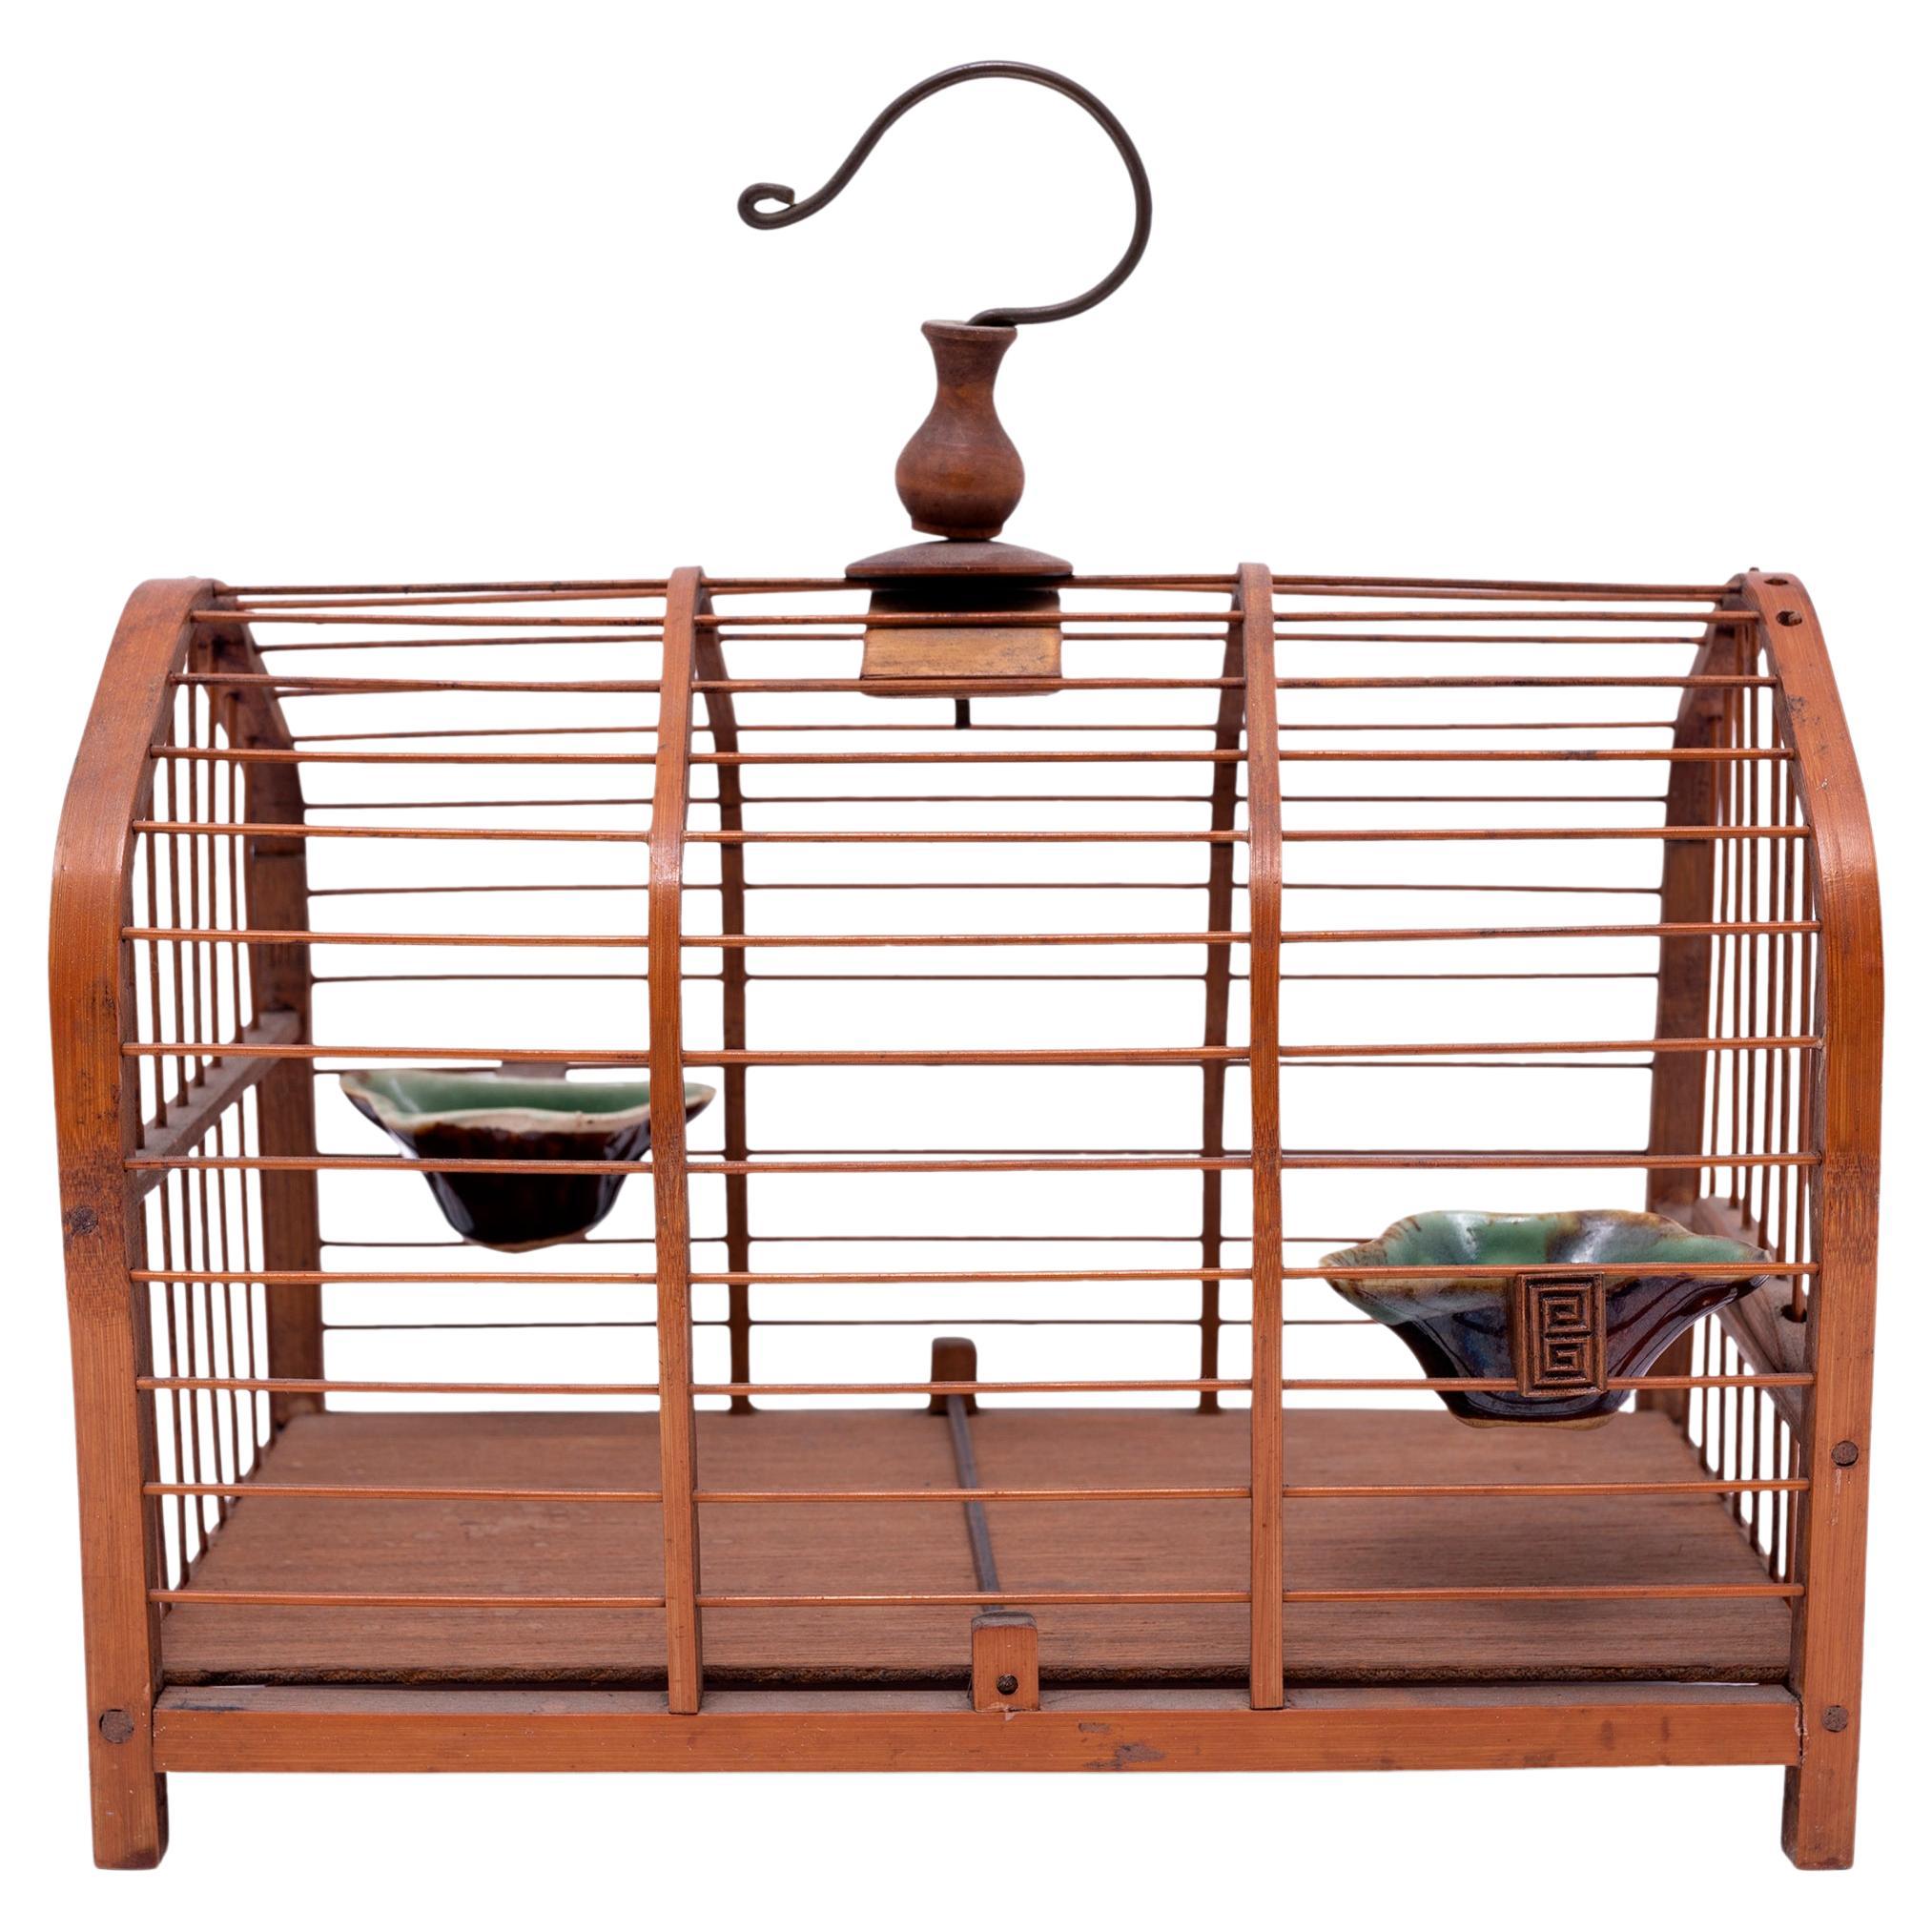 Chinese Bamboo Birdcage with Celadon Dishes, c. 1900